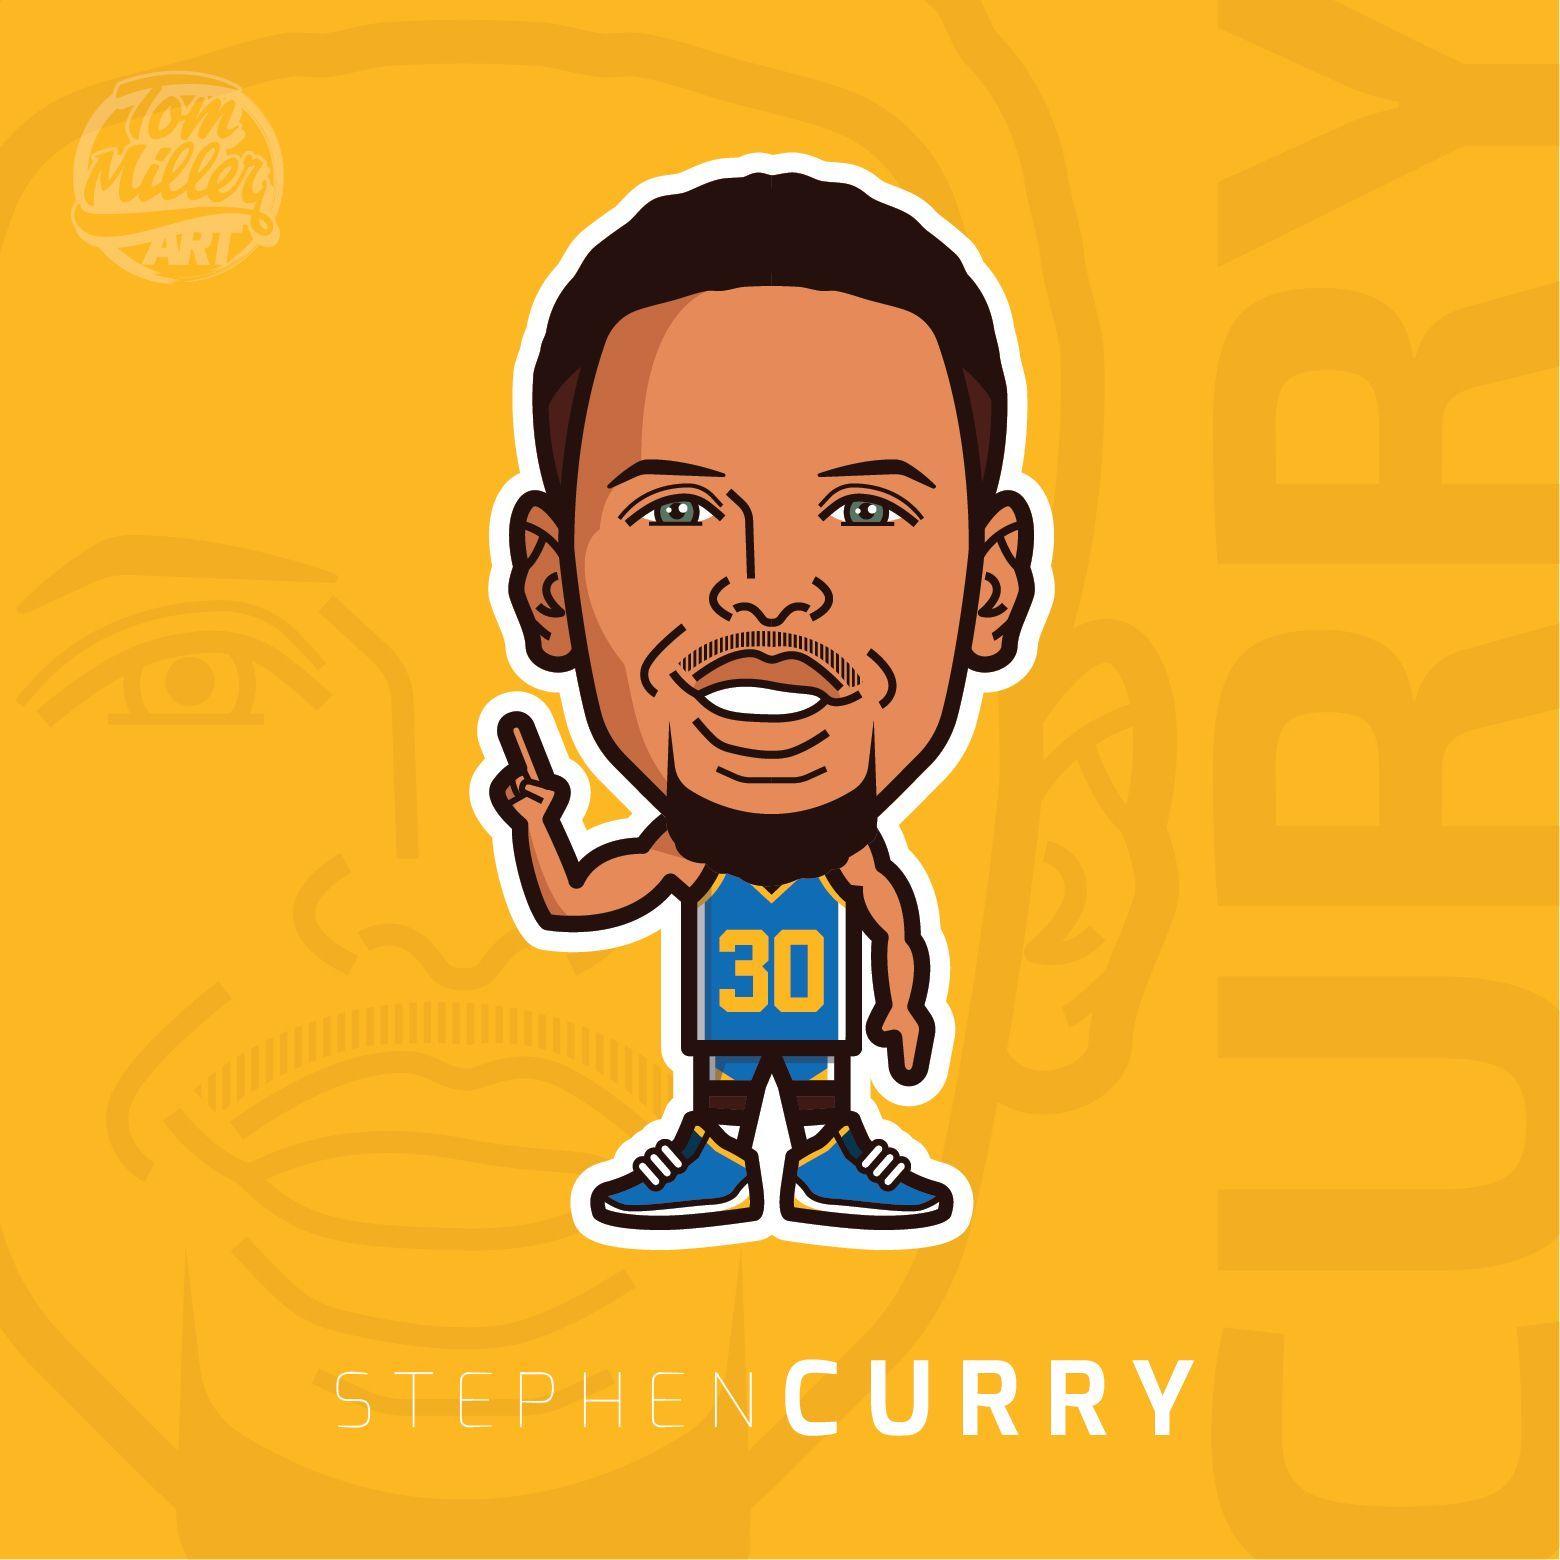 Download Stephen Curry  The Best NBA Player in the Court Wallpaper   Wallpaperscom